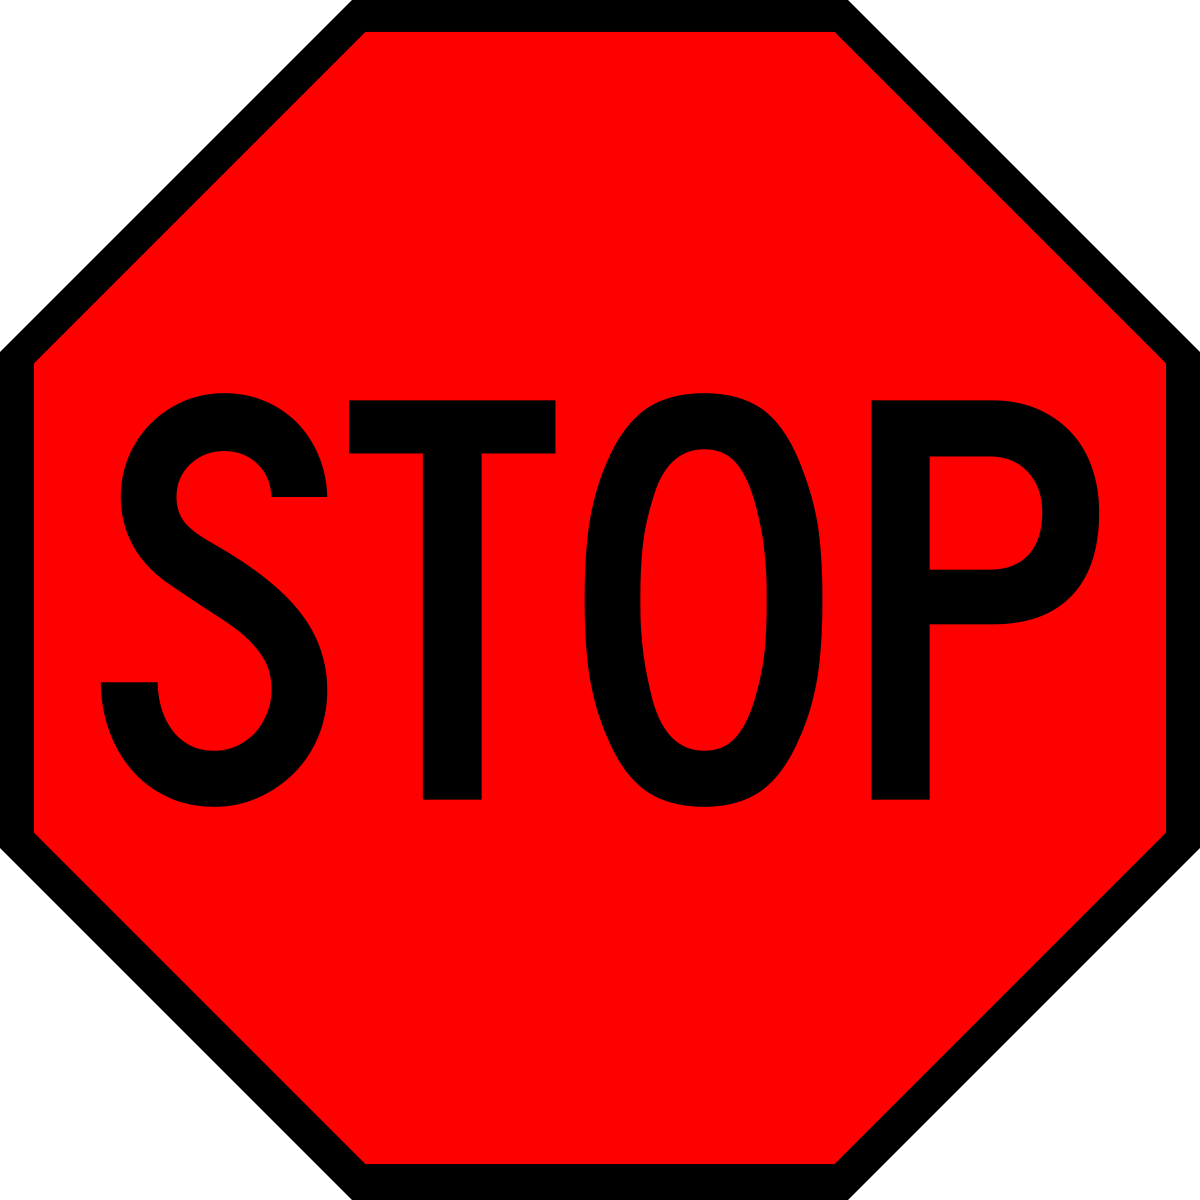 Stop Sign Light Red - Cross Traffic Does Not Stop Sign (1200x1200)